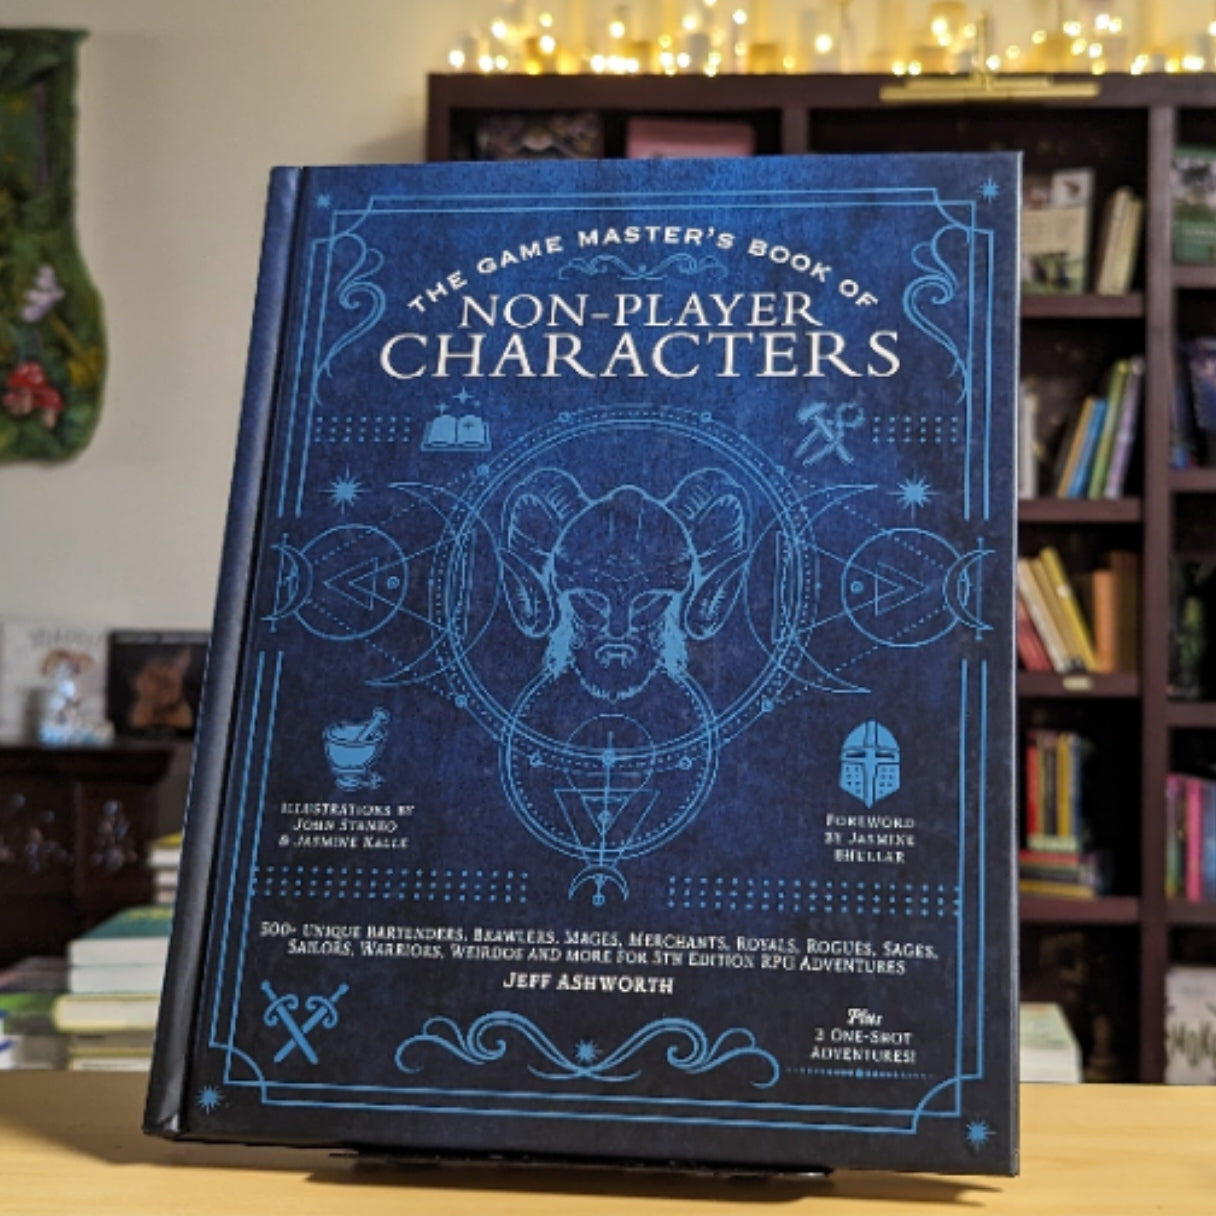 The Game Master's Book of Non-Player Characters: 500+ unique bartenders, brawlers, mages, merchants, royals, rogues, sages, sailors, warriors, weirdos ... RPG adventures (The Game Master Series)